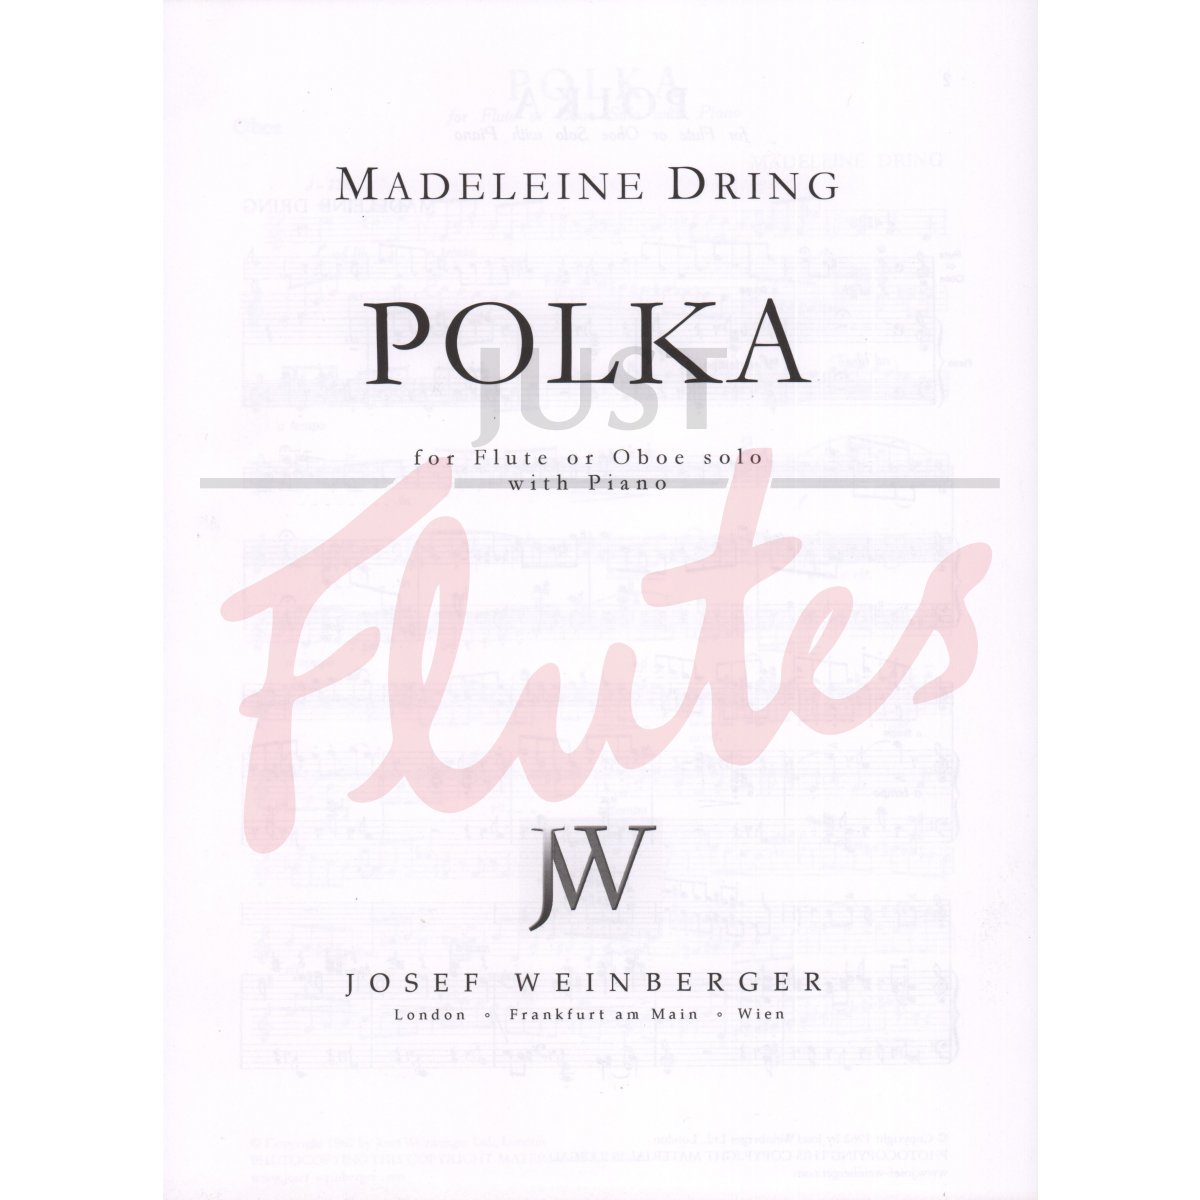 Polka for Flute and Piano